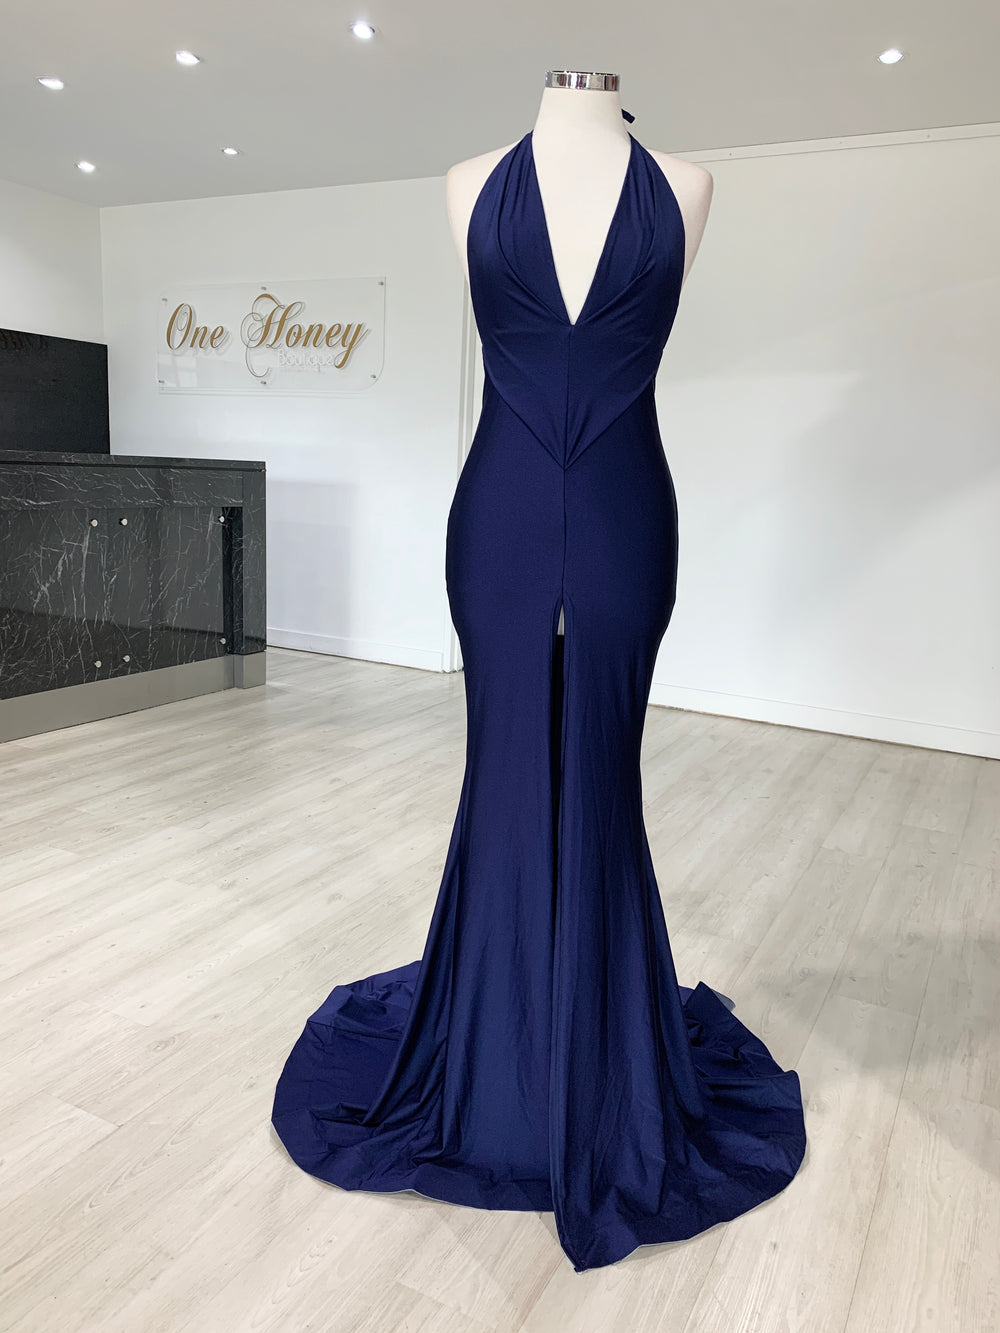 Honey Couture ARIANA Navy Blue Low Back Mermaid Evening Gown Dress